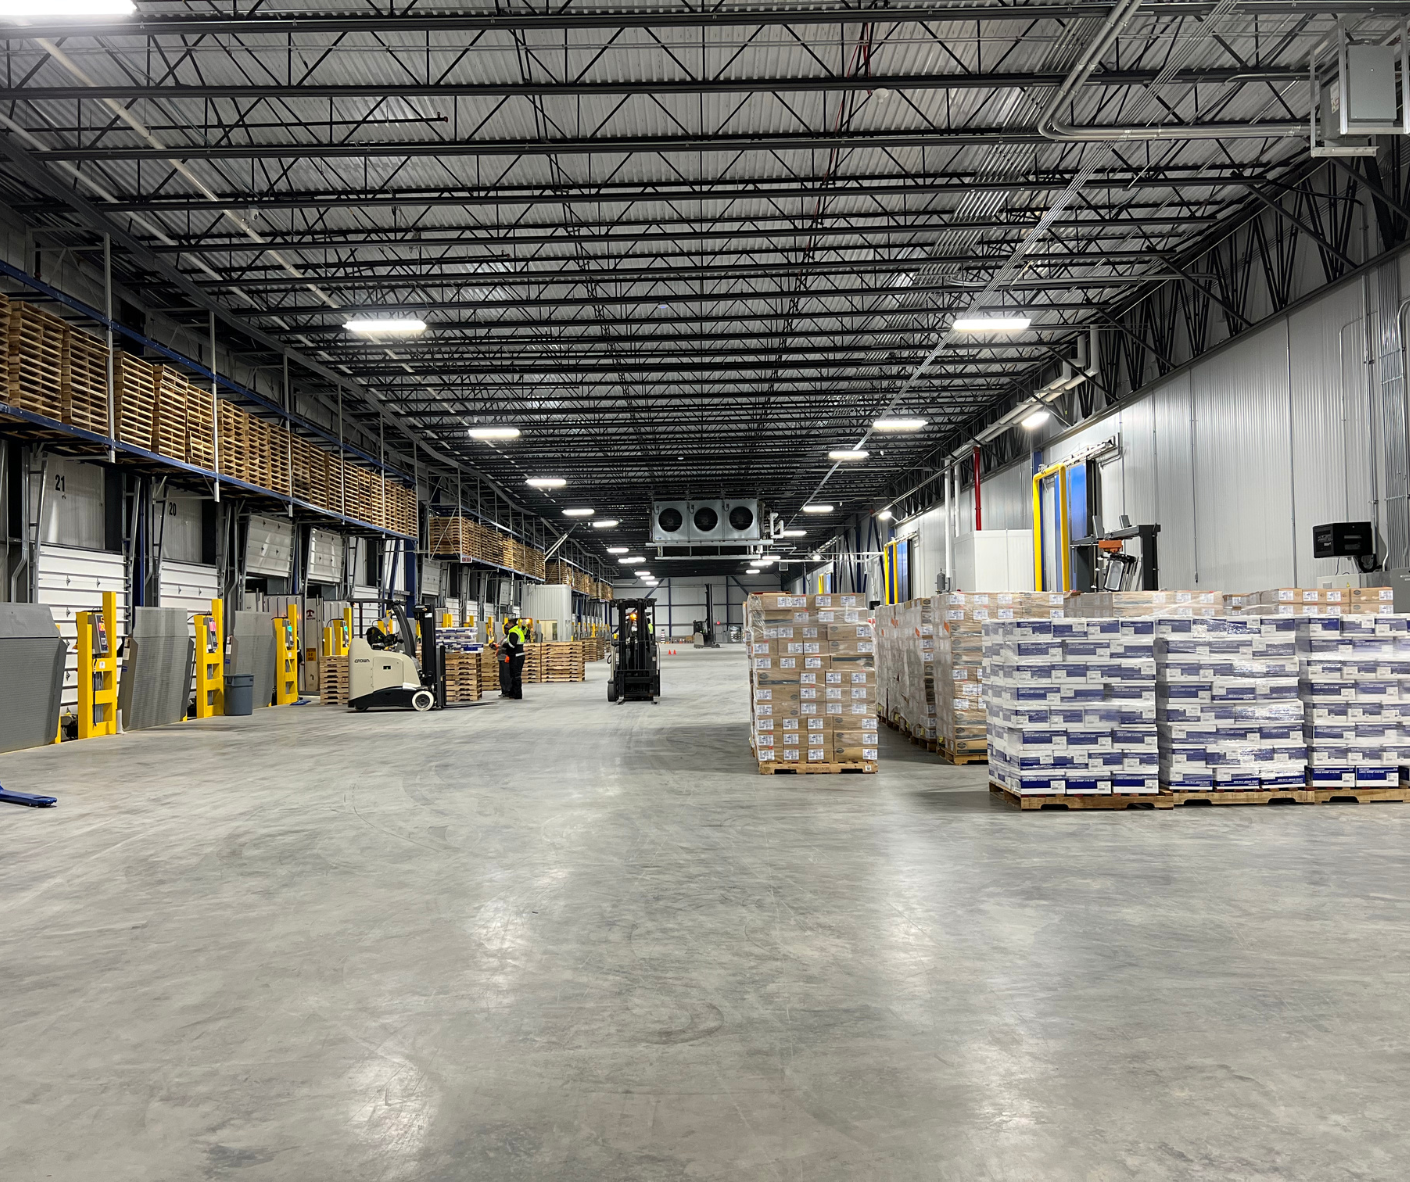 The warehouse features a 70-foot-deep chilled loading dock area with 27 bays and 18 reefer plug-ins.